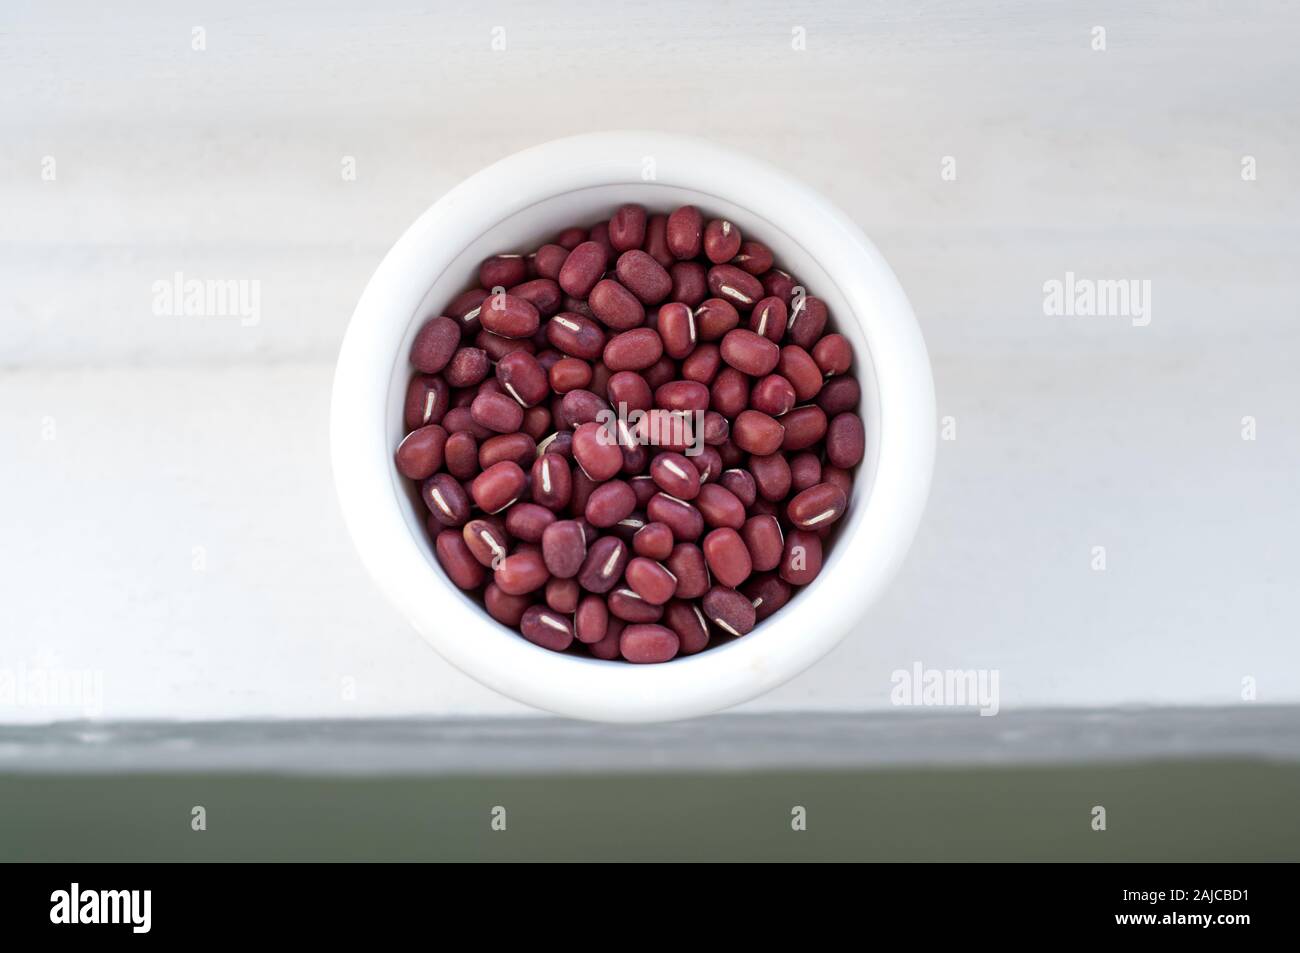 Uncooked Adzuki beans, also called azuki or aduki beans in a white bowl.  These legumes are healthy vegan or vegetarian food. Stock Photo